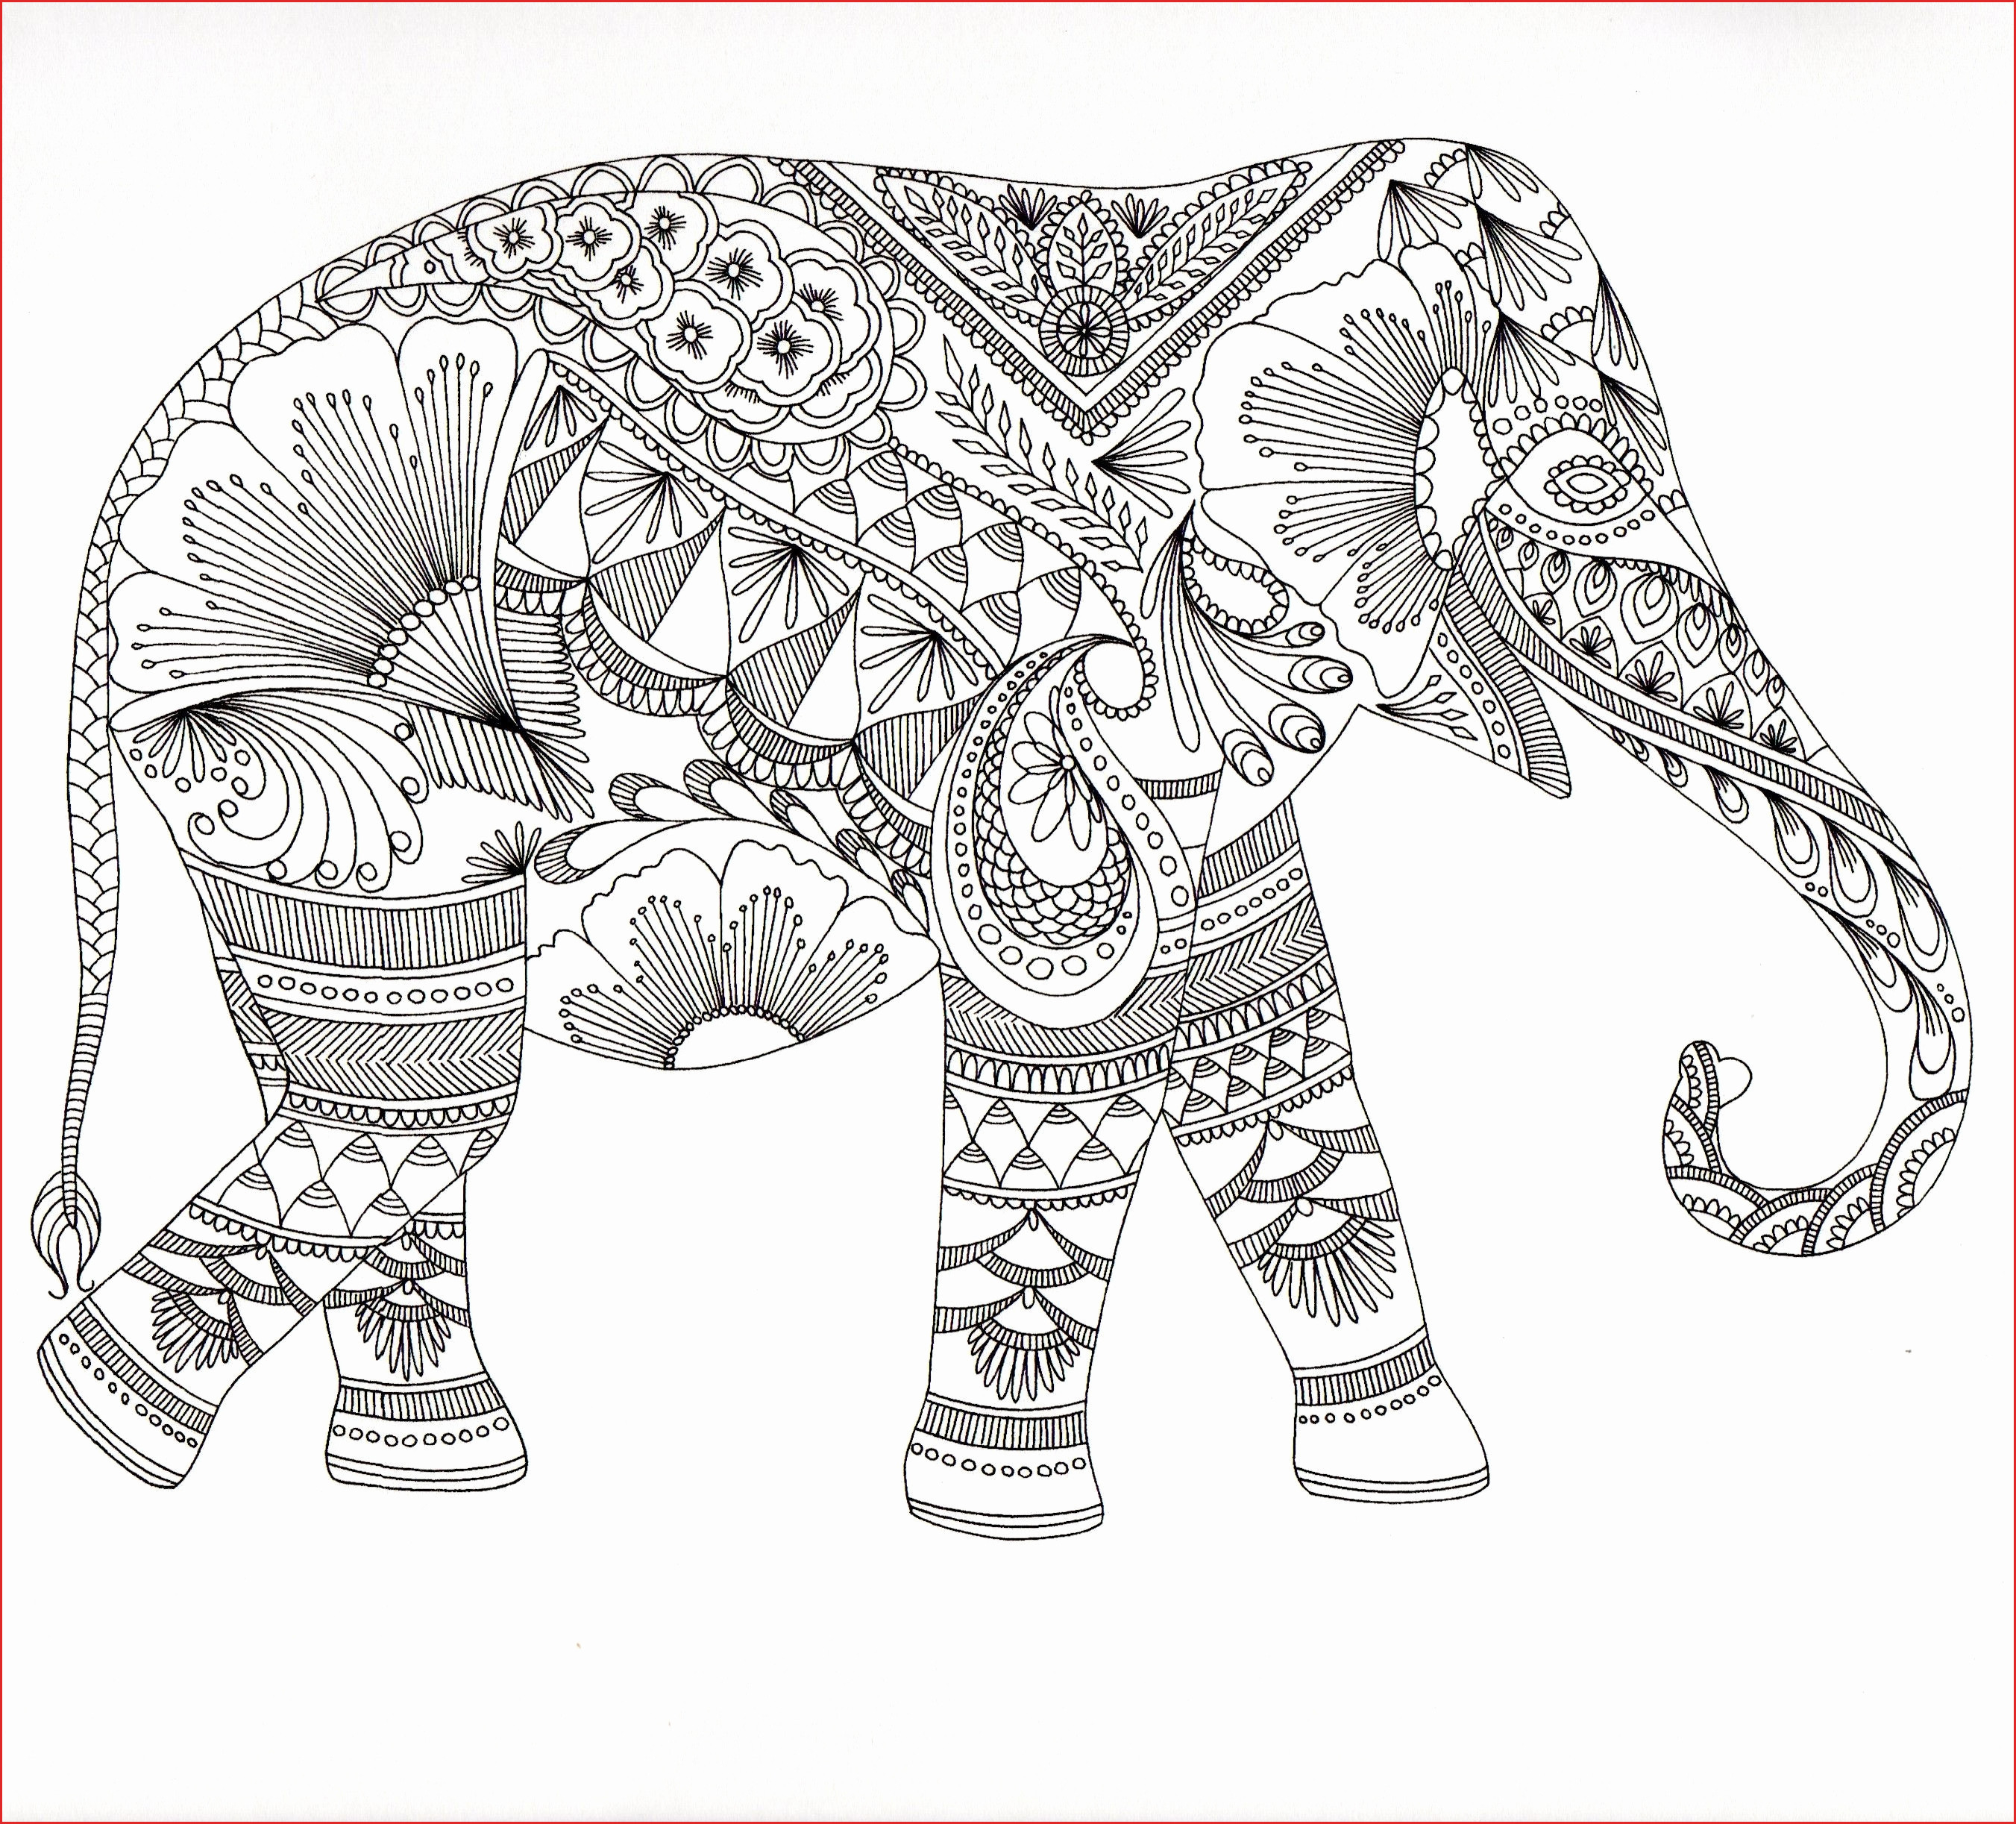 Elephant Coloring Pages For Preschool Elephant Coloring Pages 22506 Elephant Coloring Pages Printable